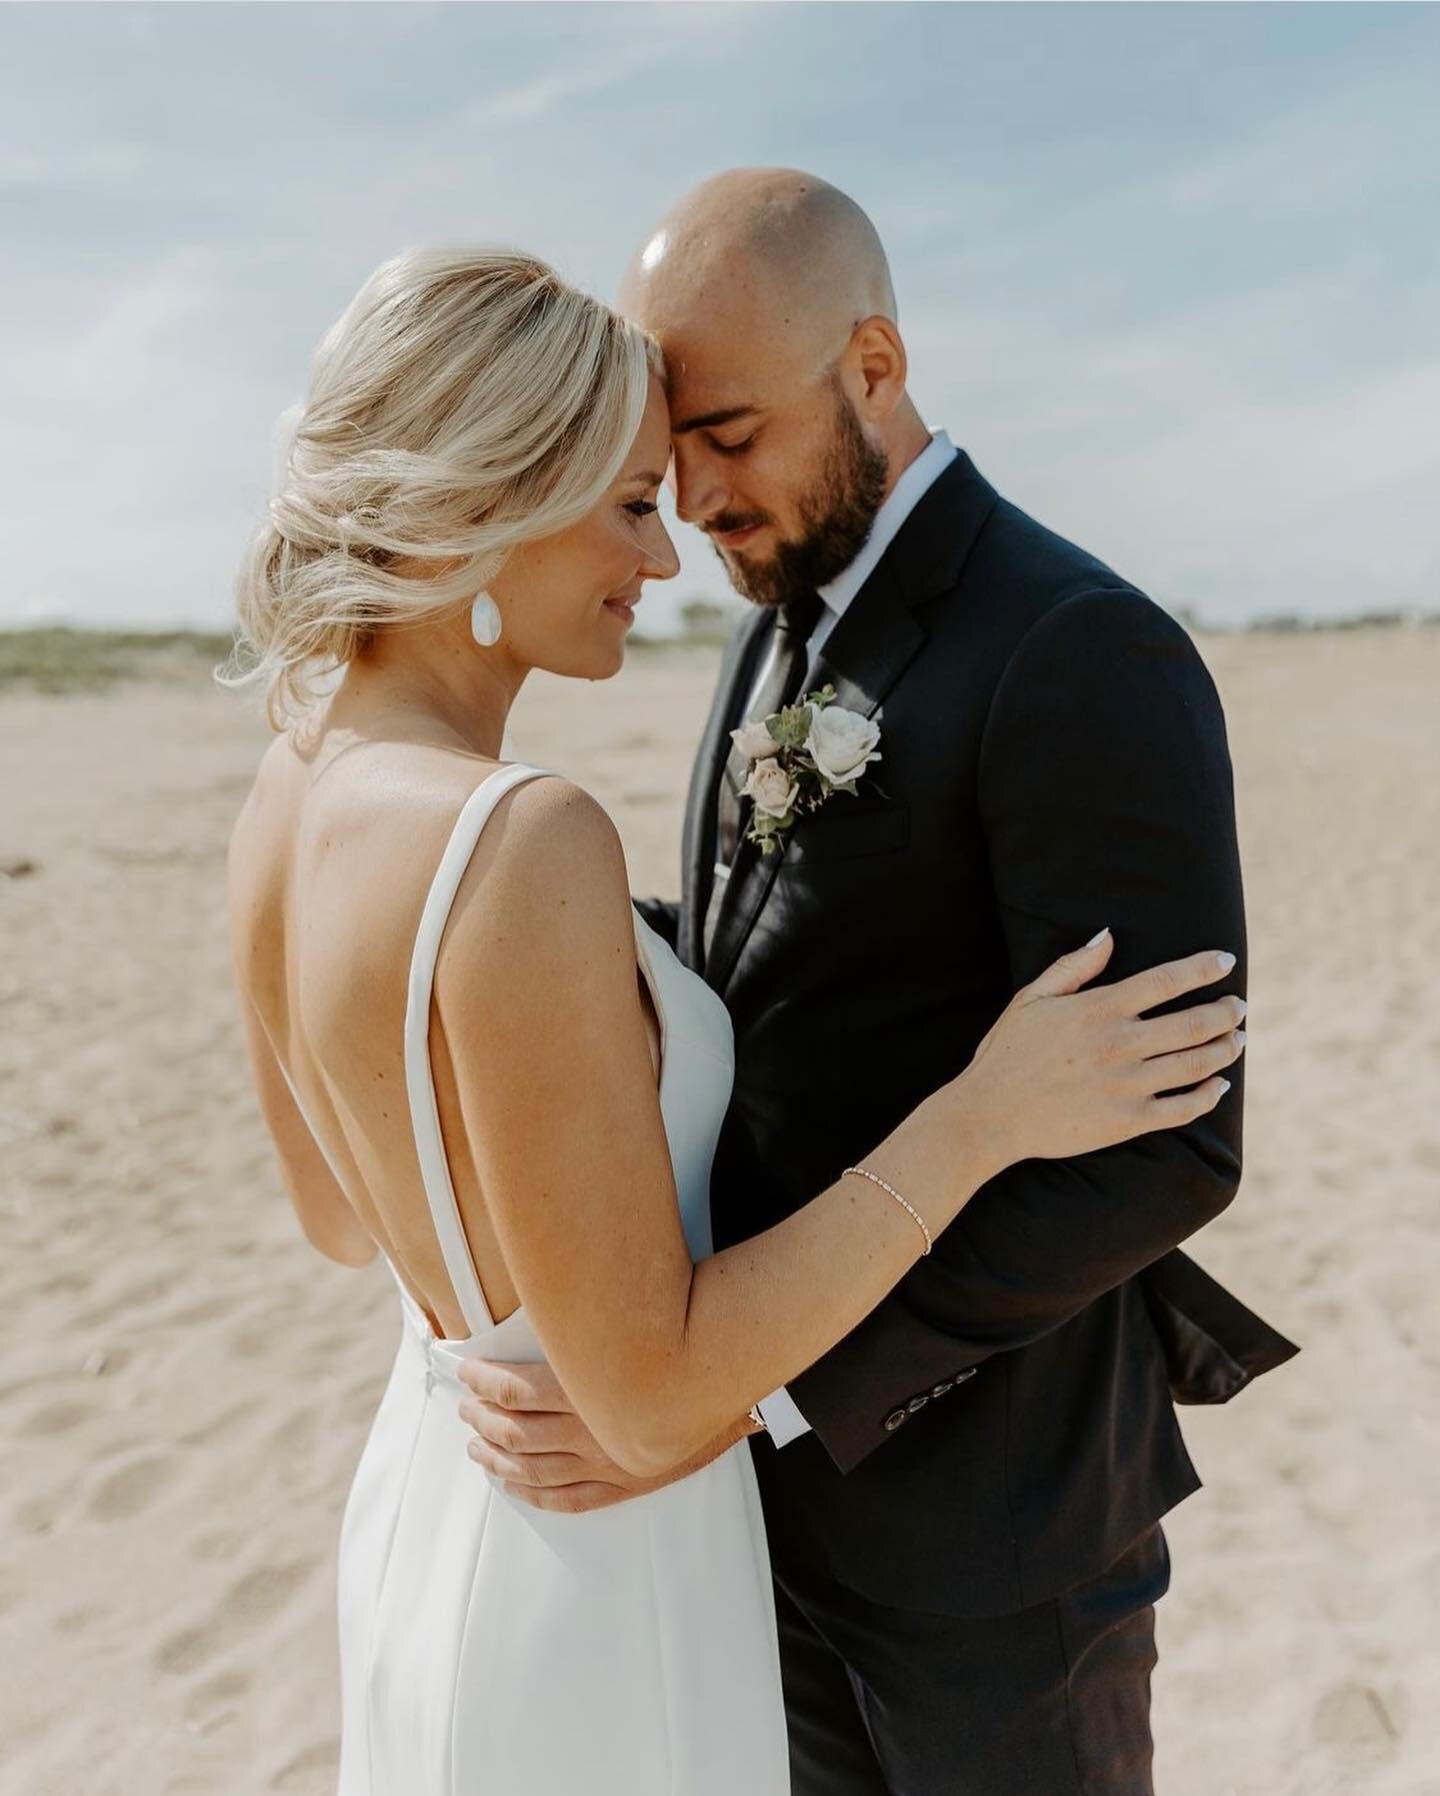 Is there anything better than summertime romance ☀️

These adorable love birds tied the knot at their family house on Plum Island, just north of Boston. Exchanging vows in the private sand dunes, with nature and family dancing around them. 

#plumisl